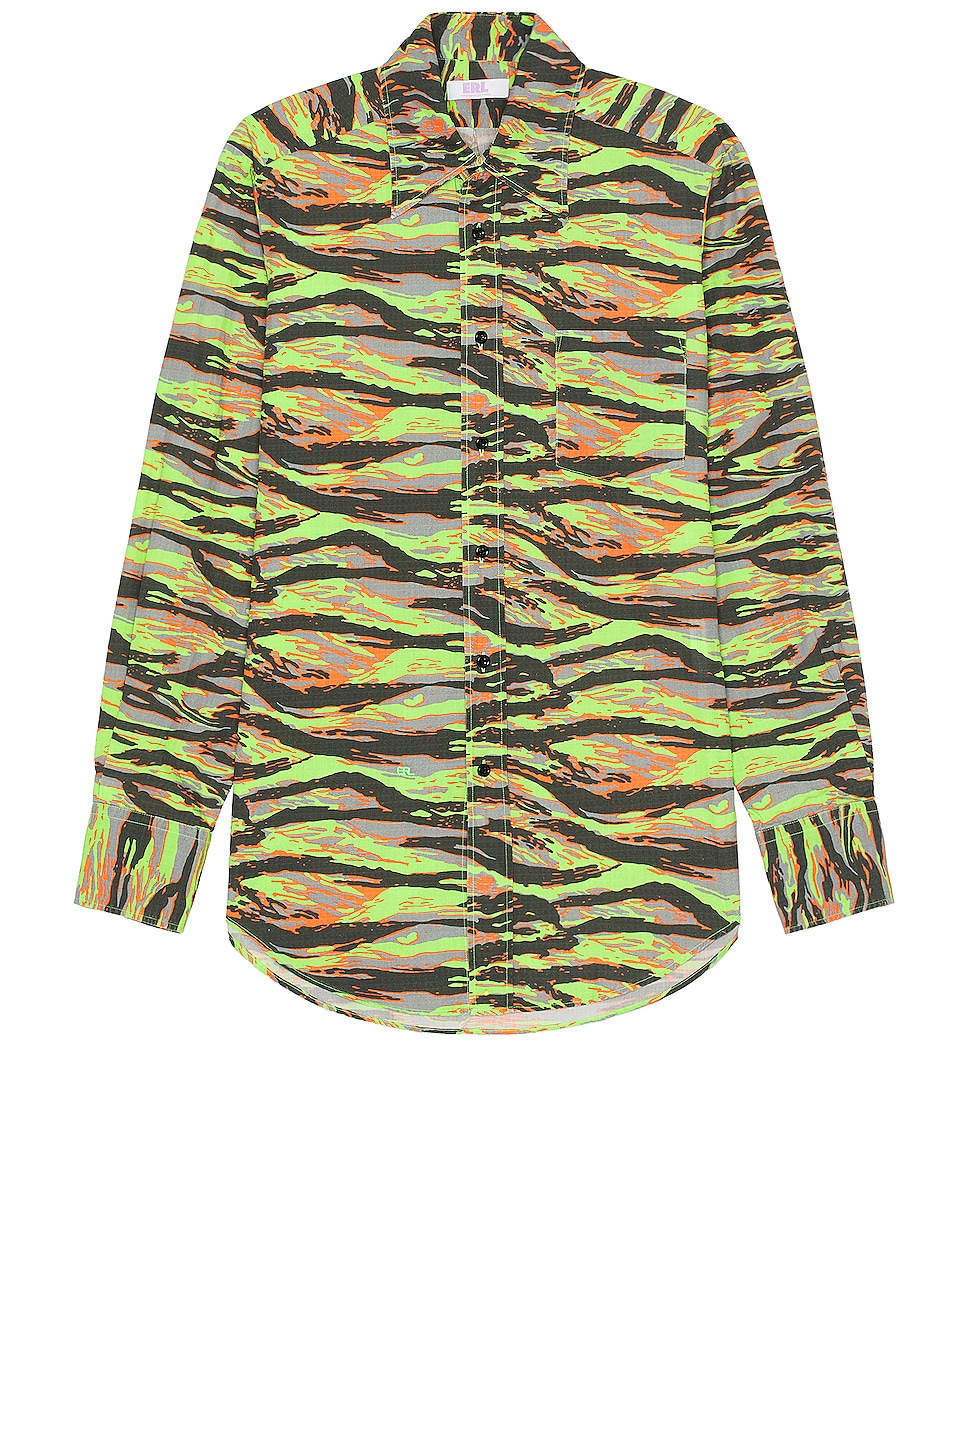 Image 1 of ERL Unisex Printed Shirt Woven in ERL GREEN RAVE CAMO